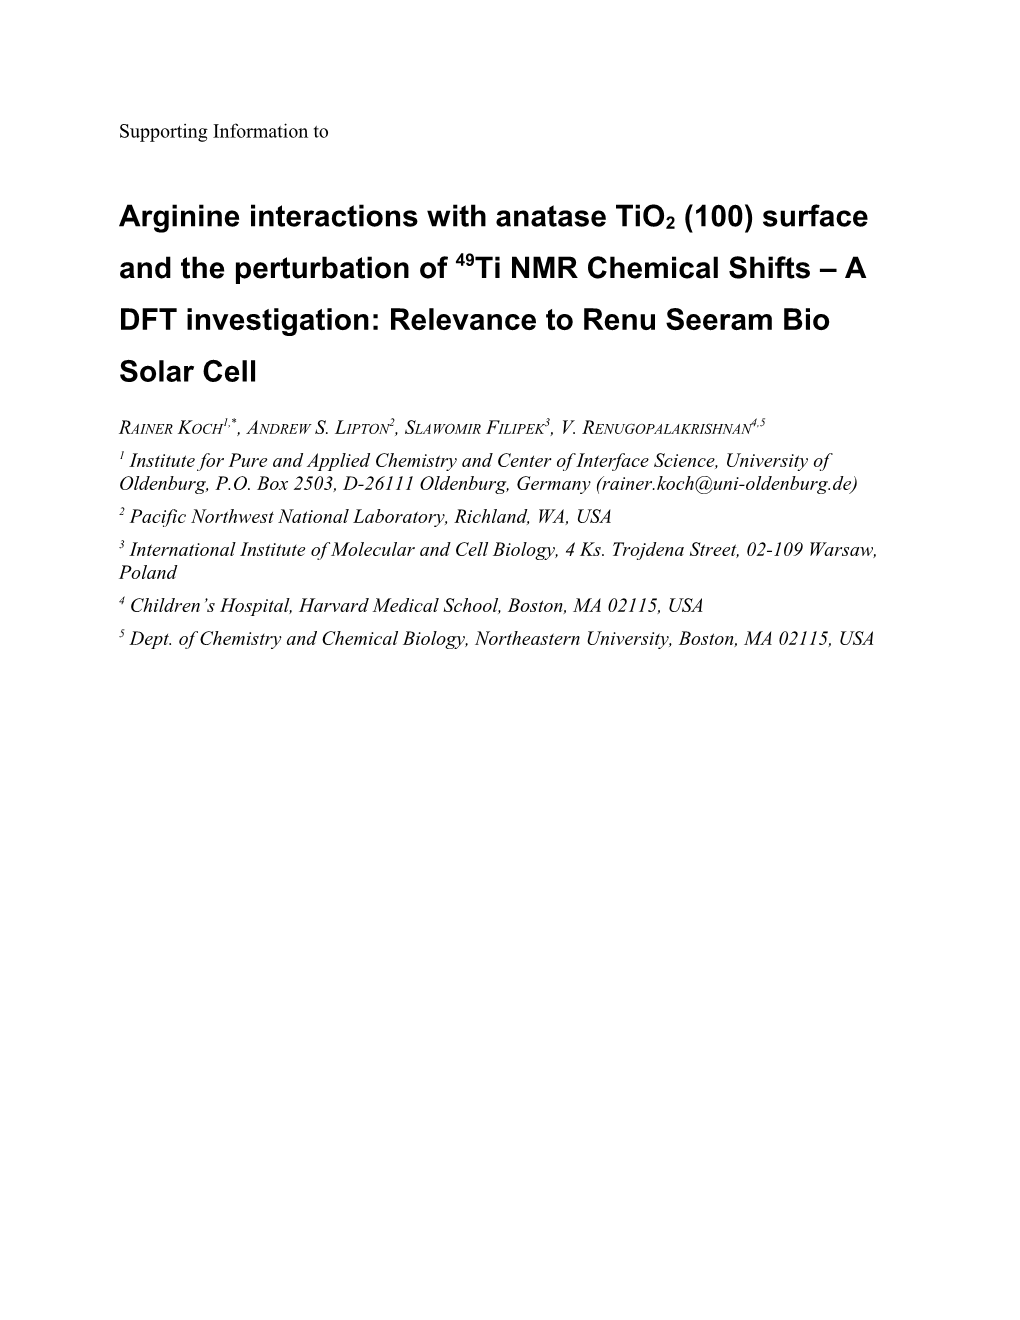 Amino Acid Interactions with the Anatase Tio2 (100) Surface and the Impact on 49Ti NMR